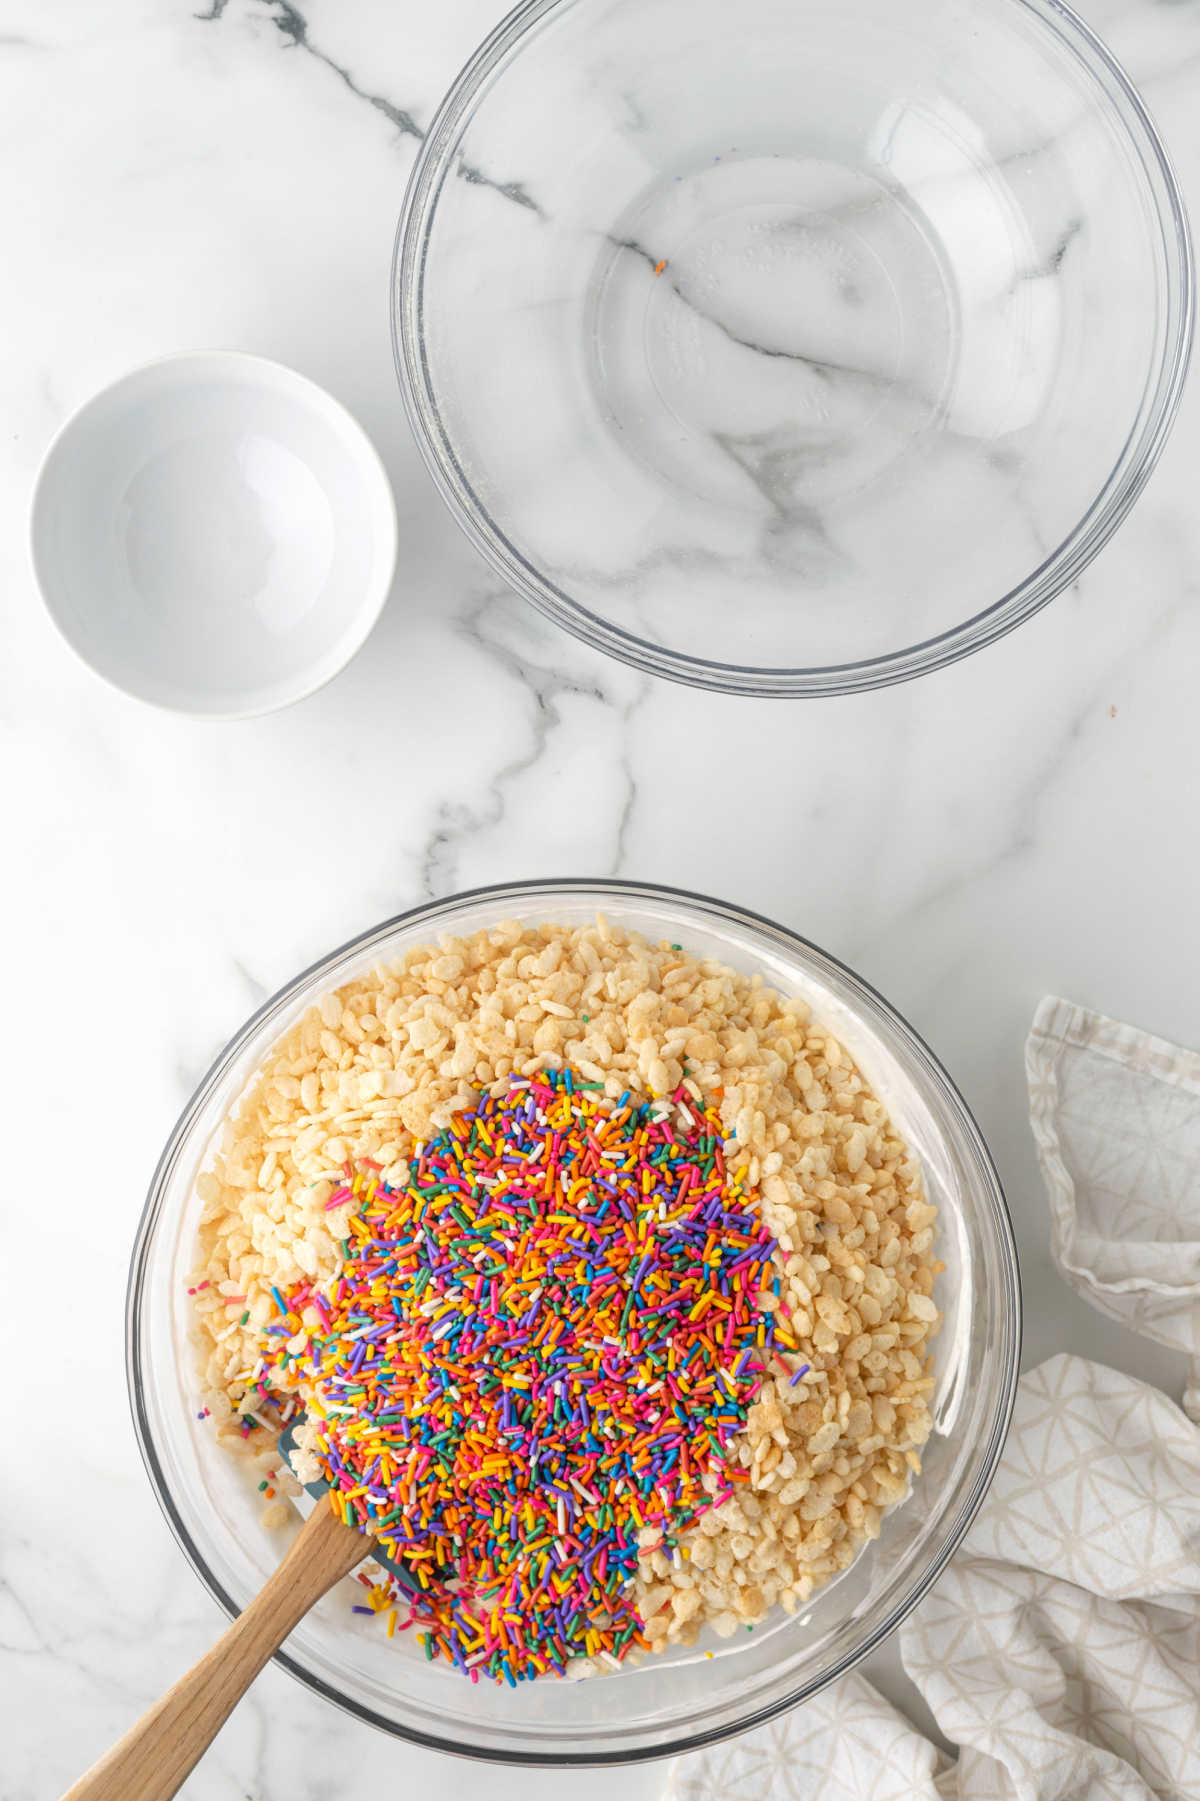 A spatula mixing rice krispies cereal and sprinkles into melted marshmallow.